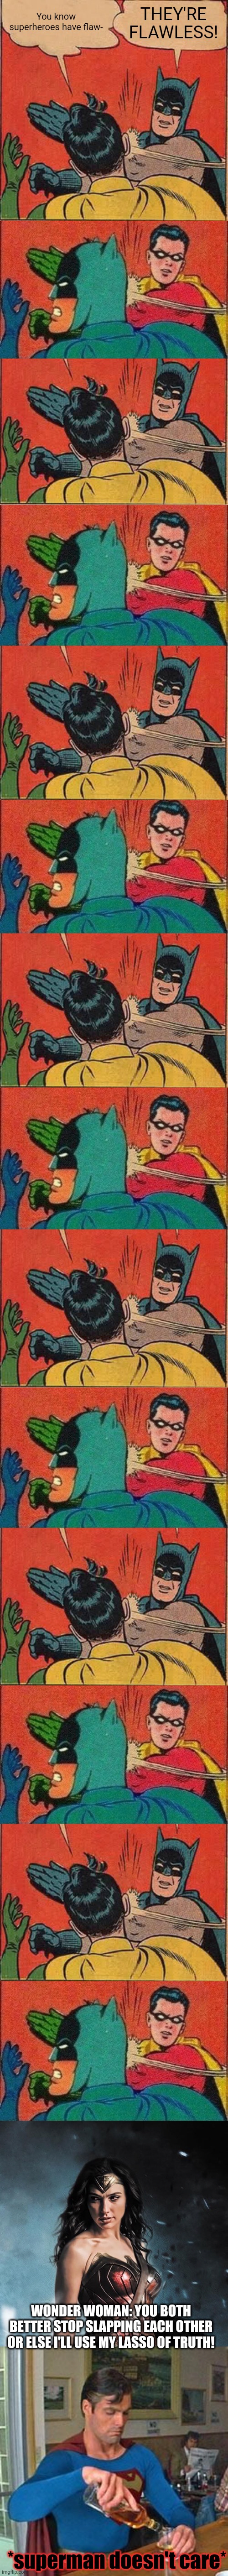 Batman And Robin In: Slap Wars | You know superheroes have flaw-; THEY'RE FLAWLESS! WONDER WOMAN: YOU BOTH BETTER STOP SLAPPING EACH OTHER OR ELSE I'LL USE MY LASSO OF TRUTH! *superman doesn't care* | image tagged in memes,batman slapping robin,robin slaps batman,wonder woman,drunk superman,slapping | made w/ Imgflip meme maker